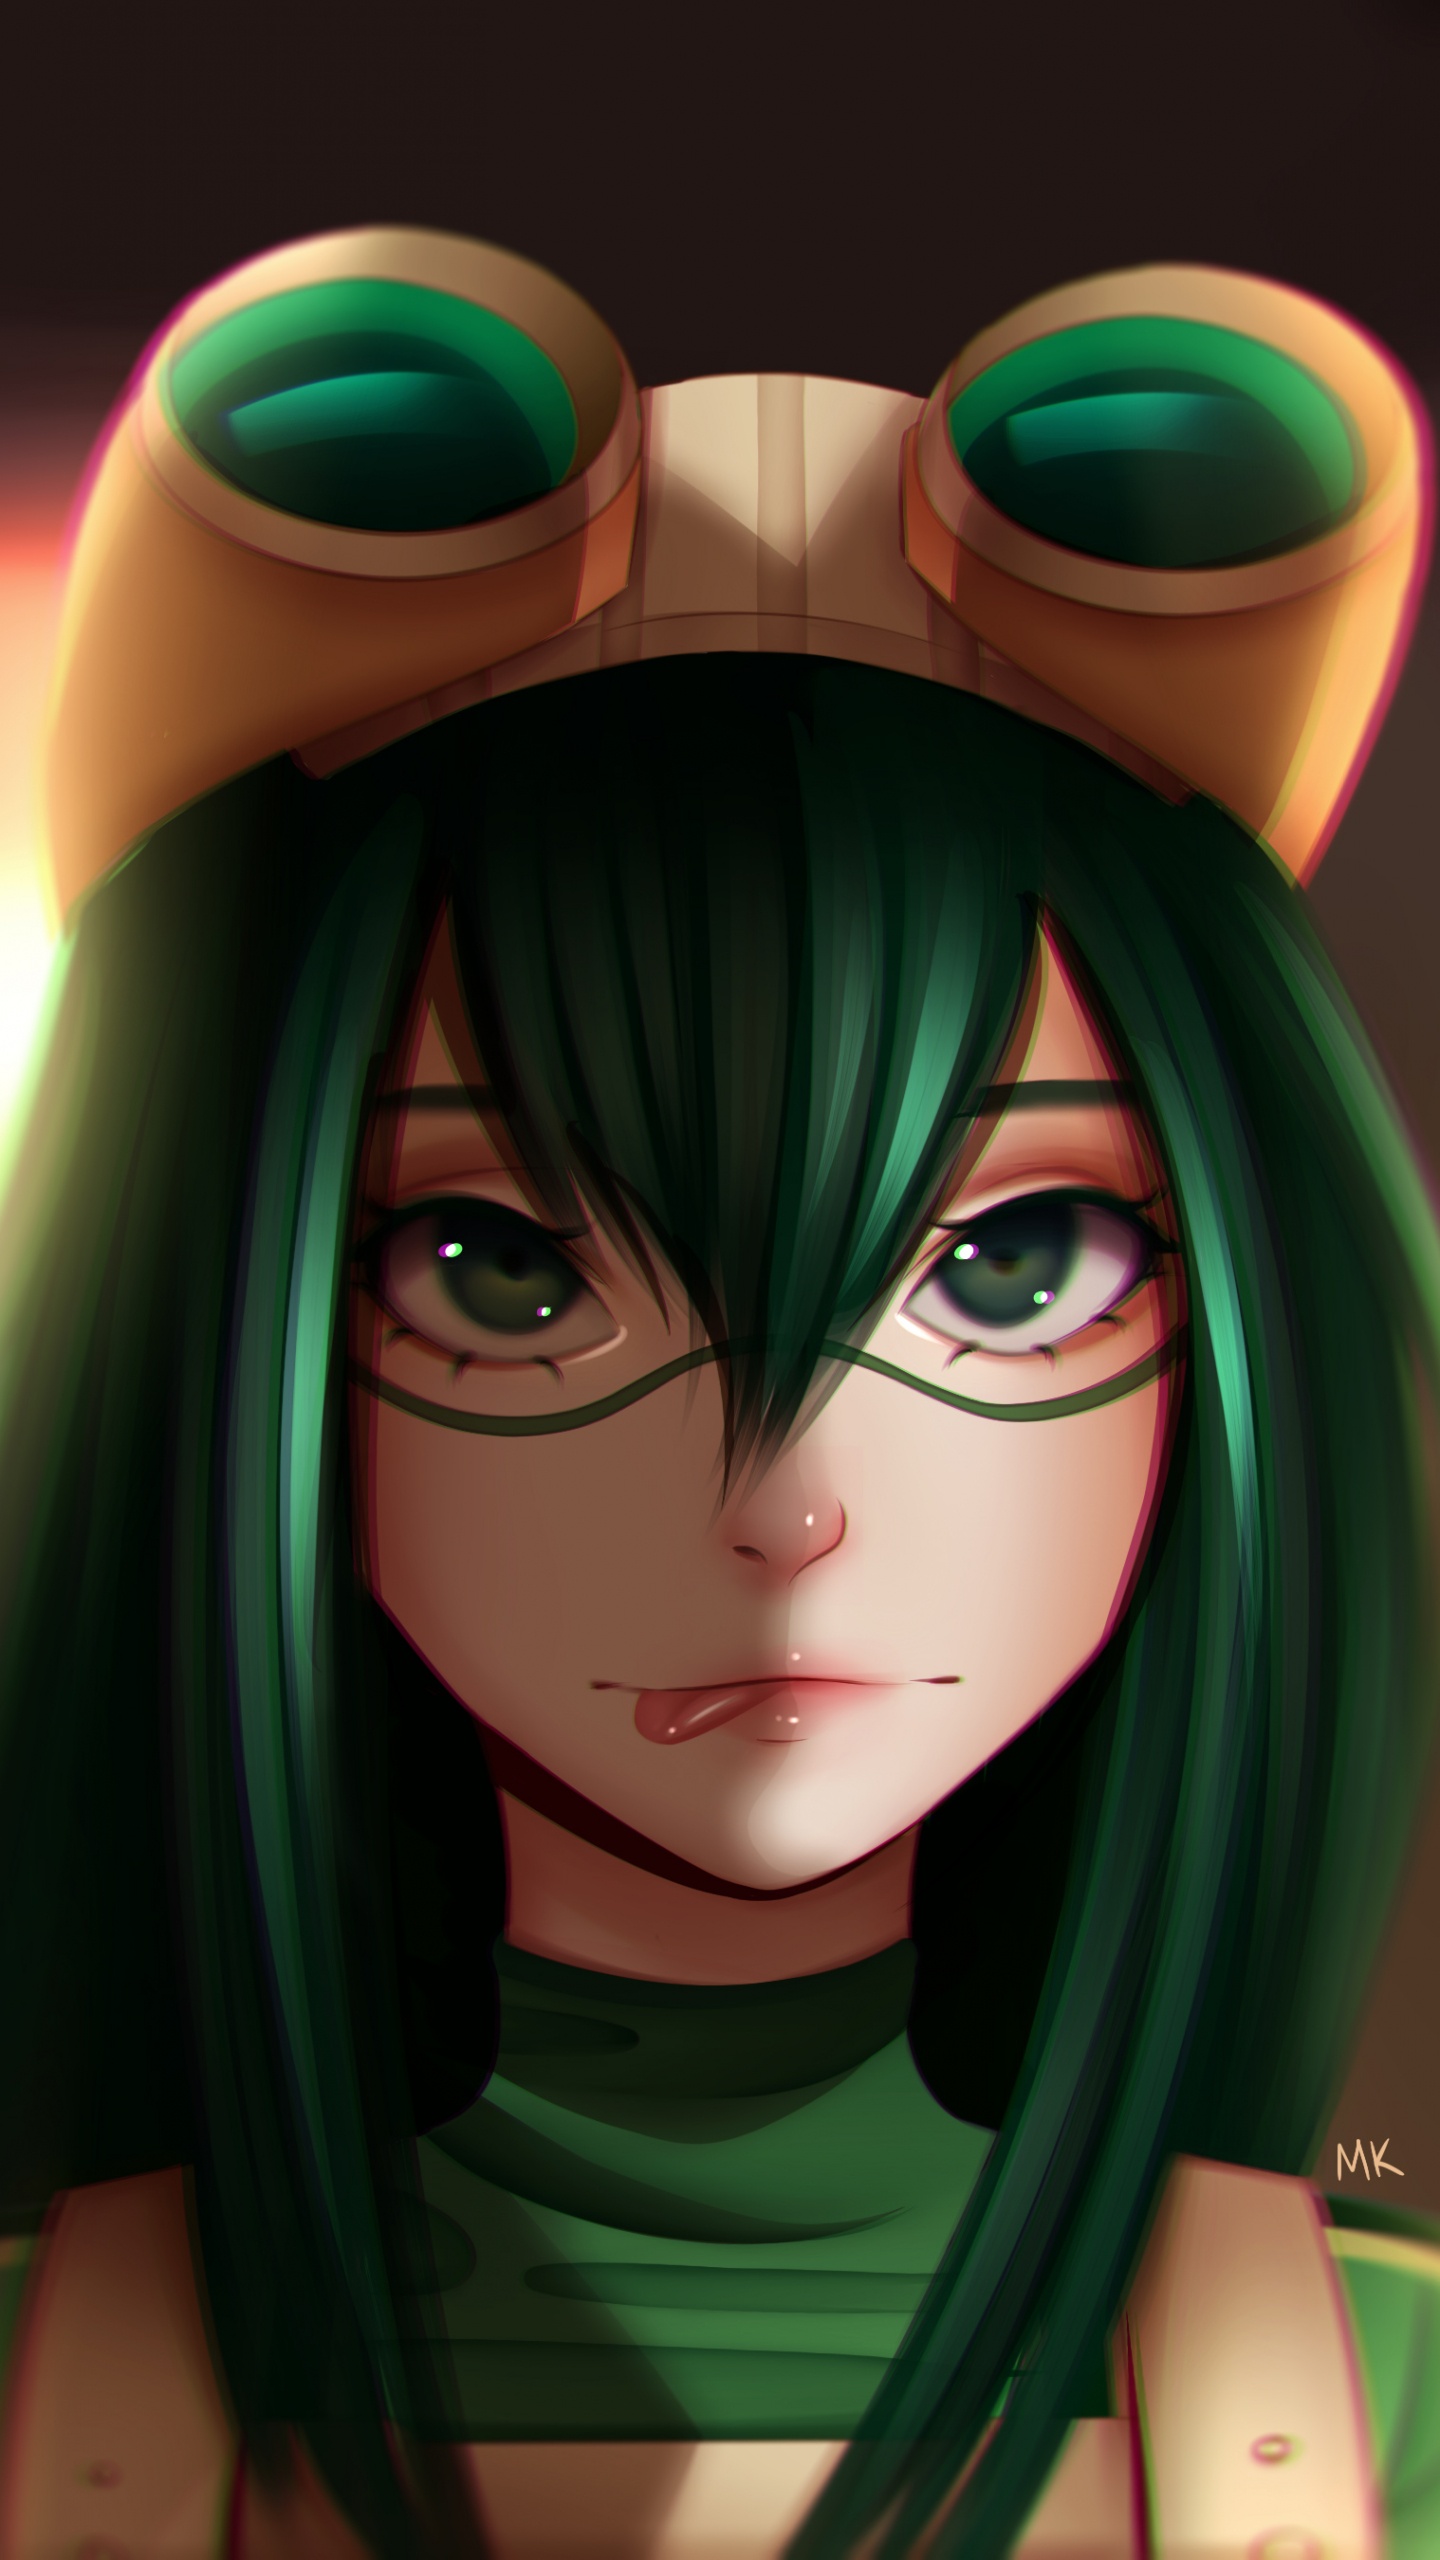 Green Haired Female Anime Character. Wallpaper in 1440x2560 Resolution